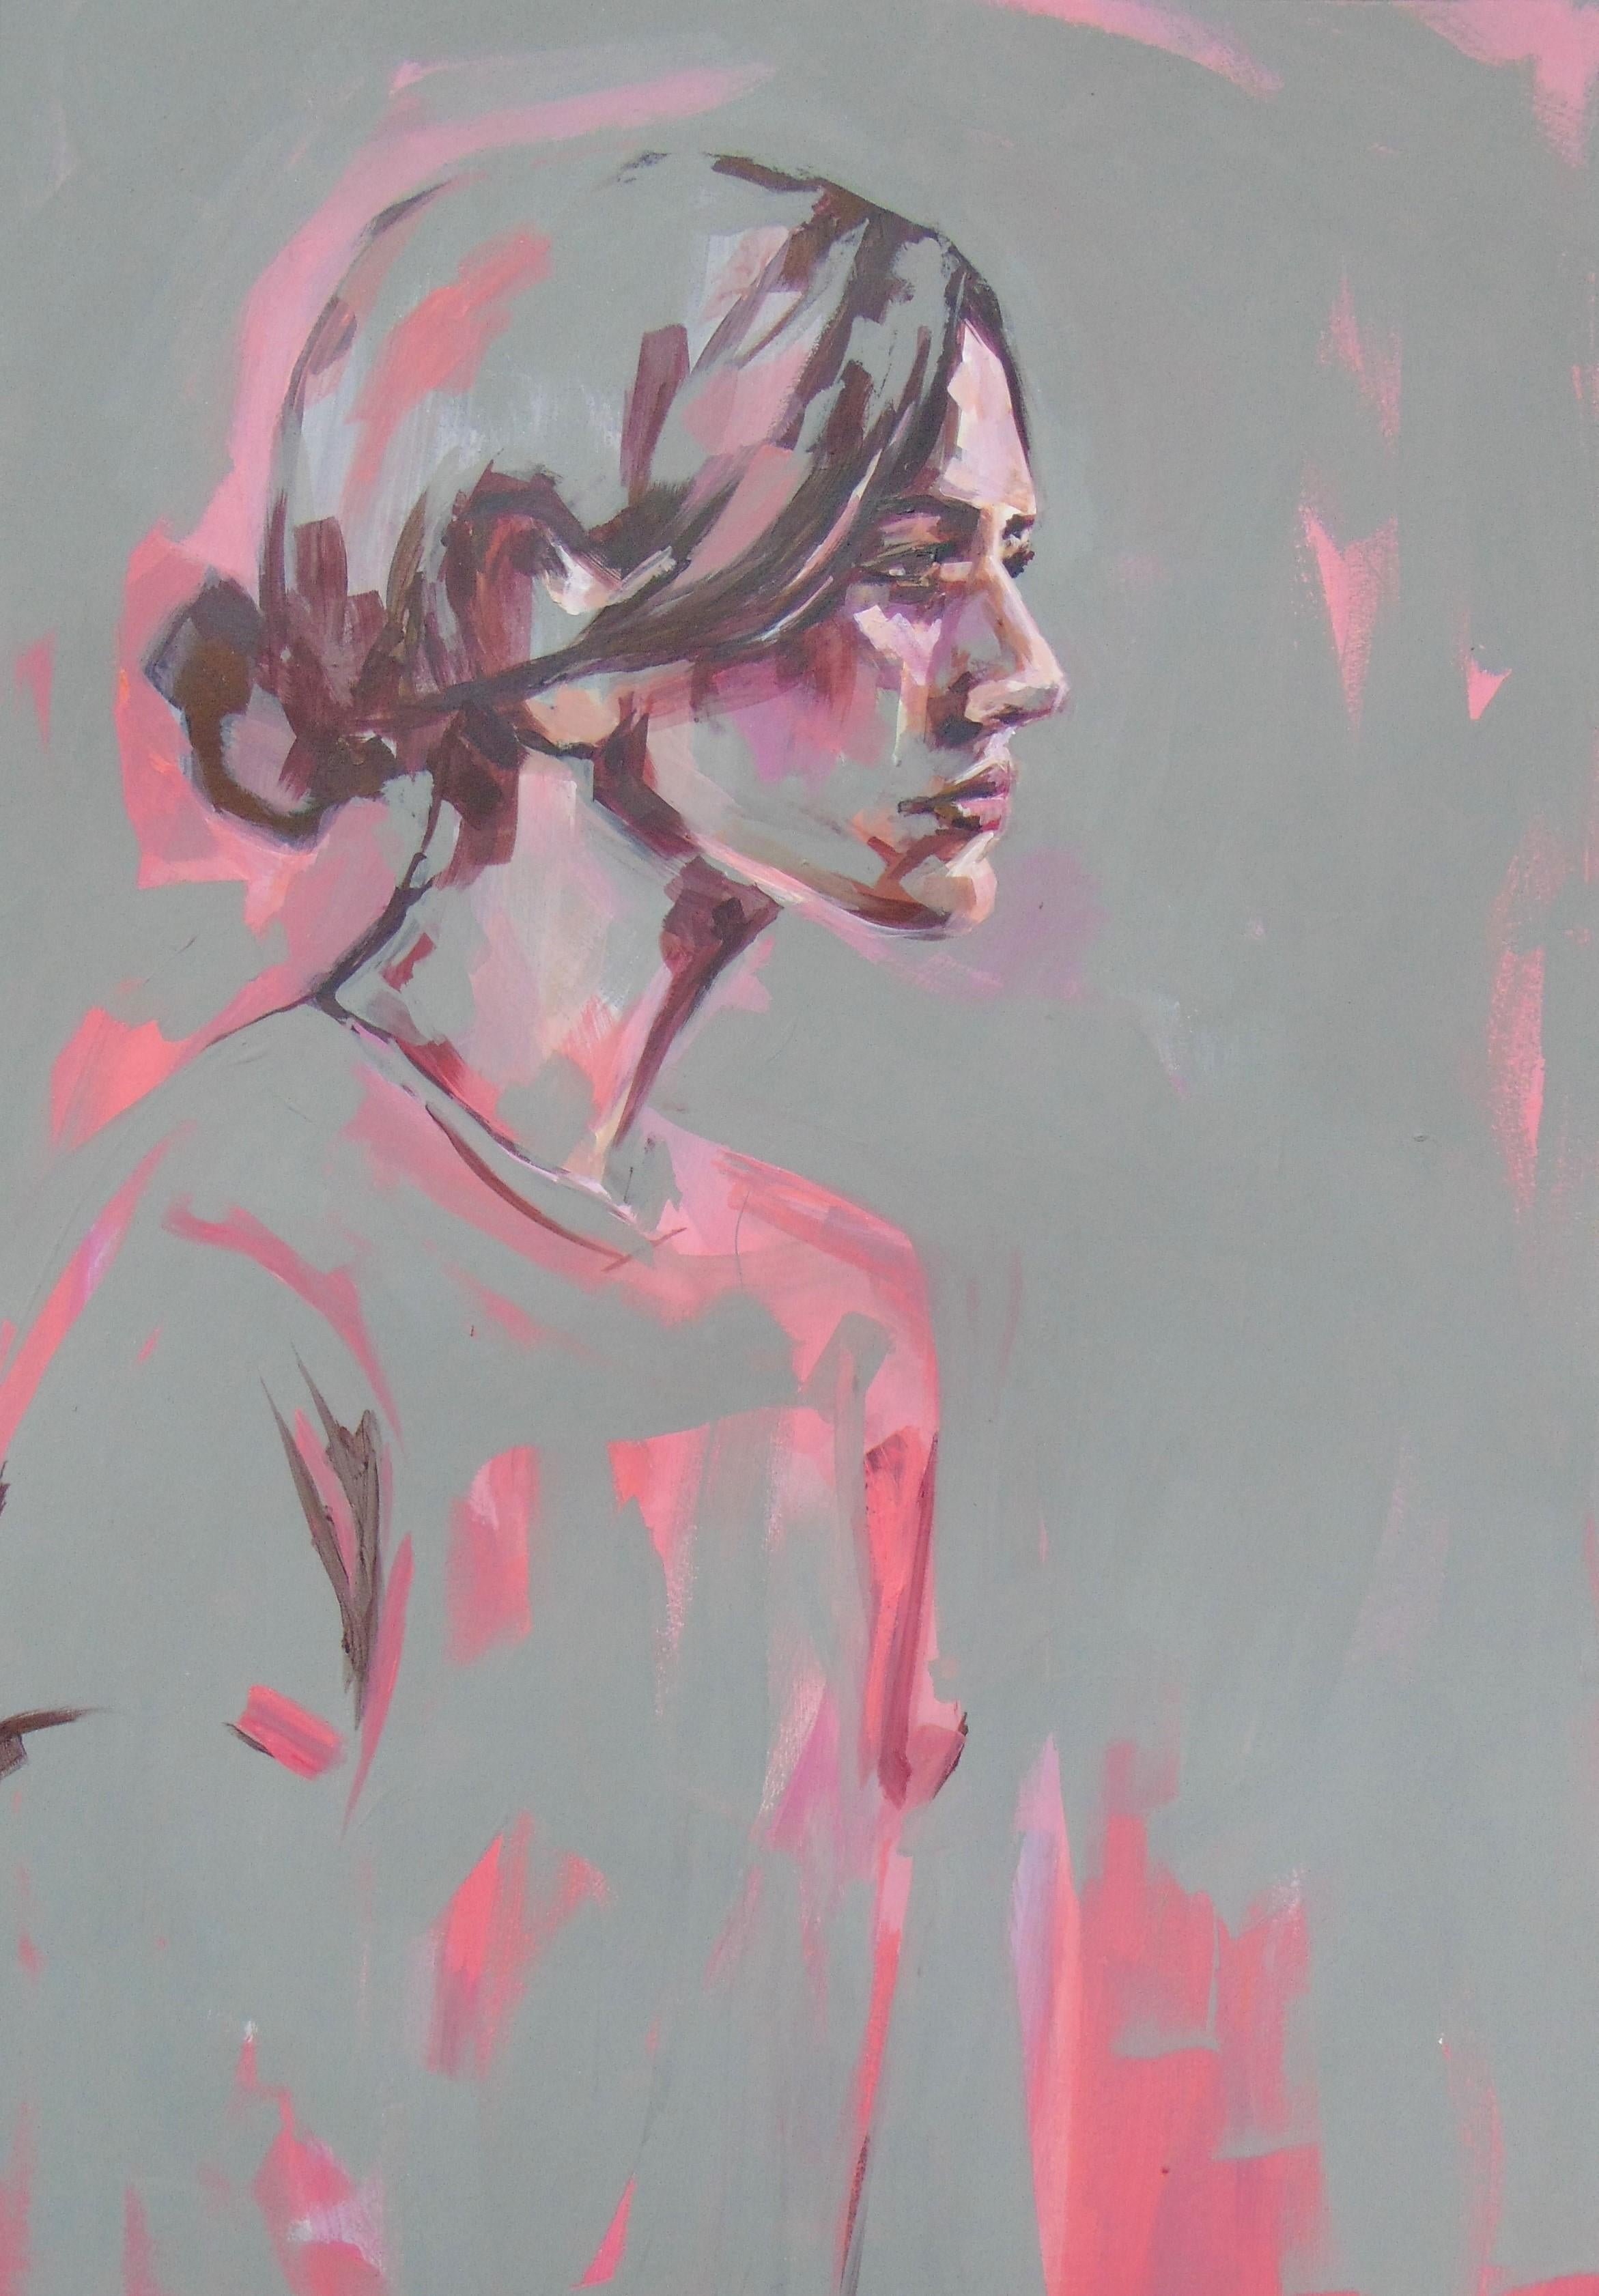 Pink and Grey, original signed great reviews vibrant portrait emerging art - Art by Flo Lee